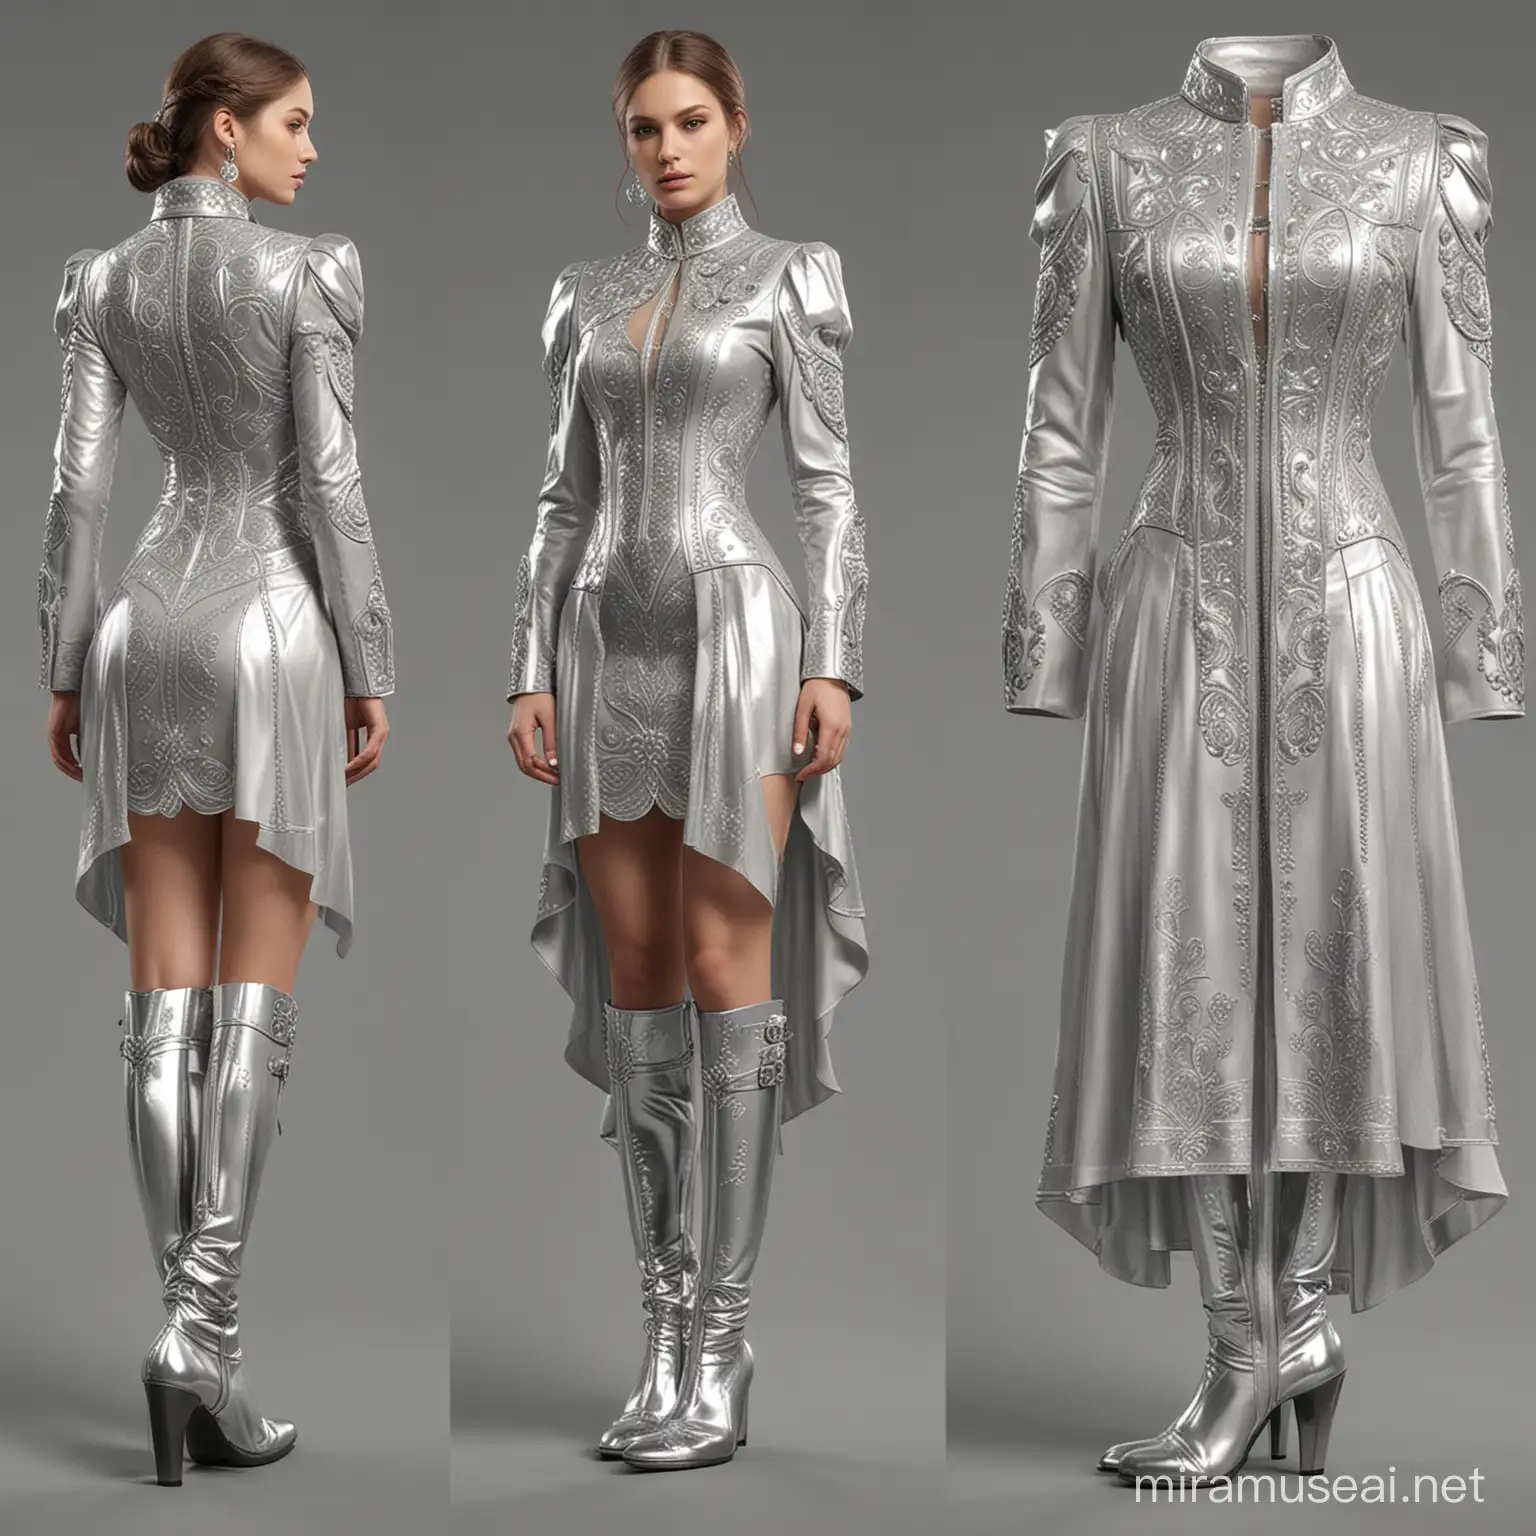 Luxurious Casiphia Silver Dress with Boots Elegant Fashion Inspired by Old Aesthetic Money